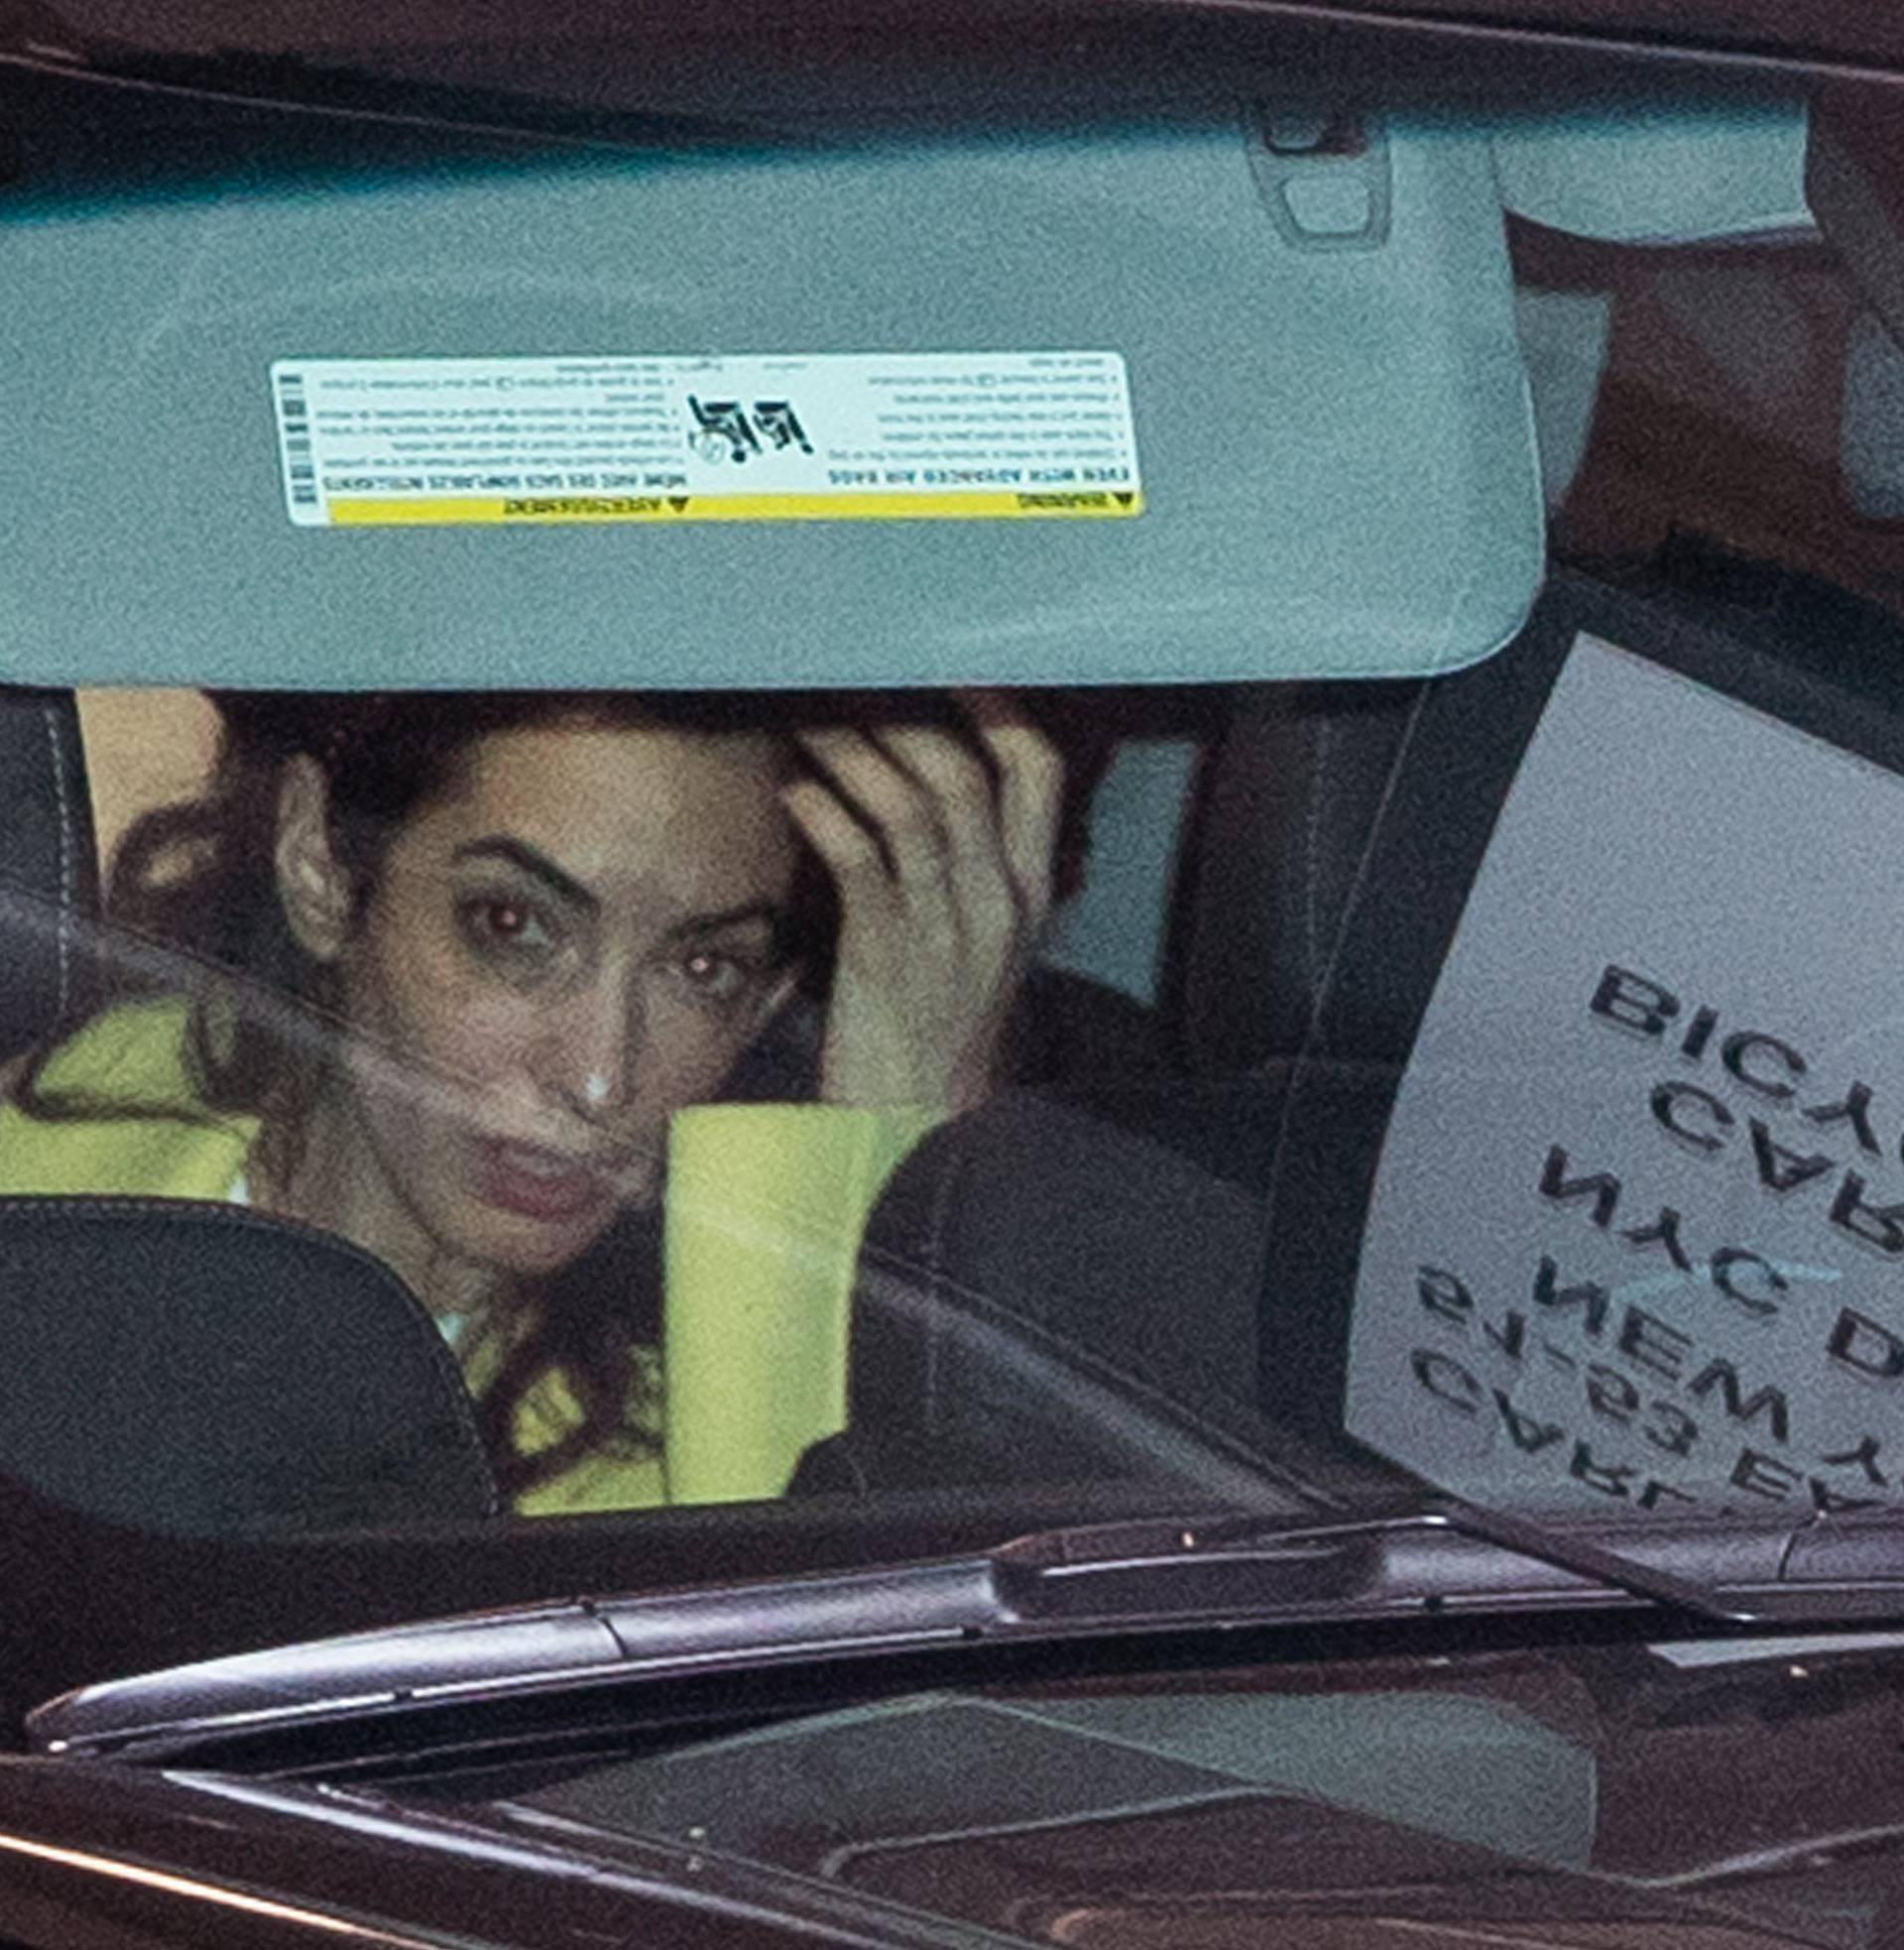 George CLooney and Amal Clooney put their kids into the SUV in the garage at a hotel in New York